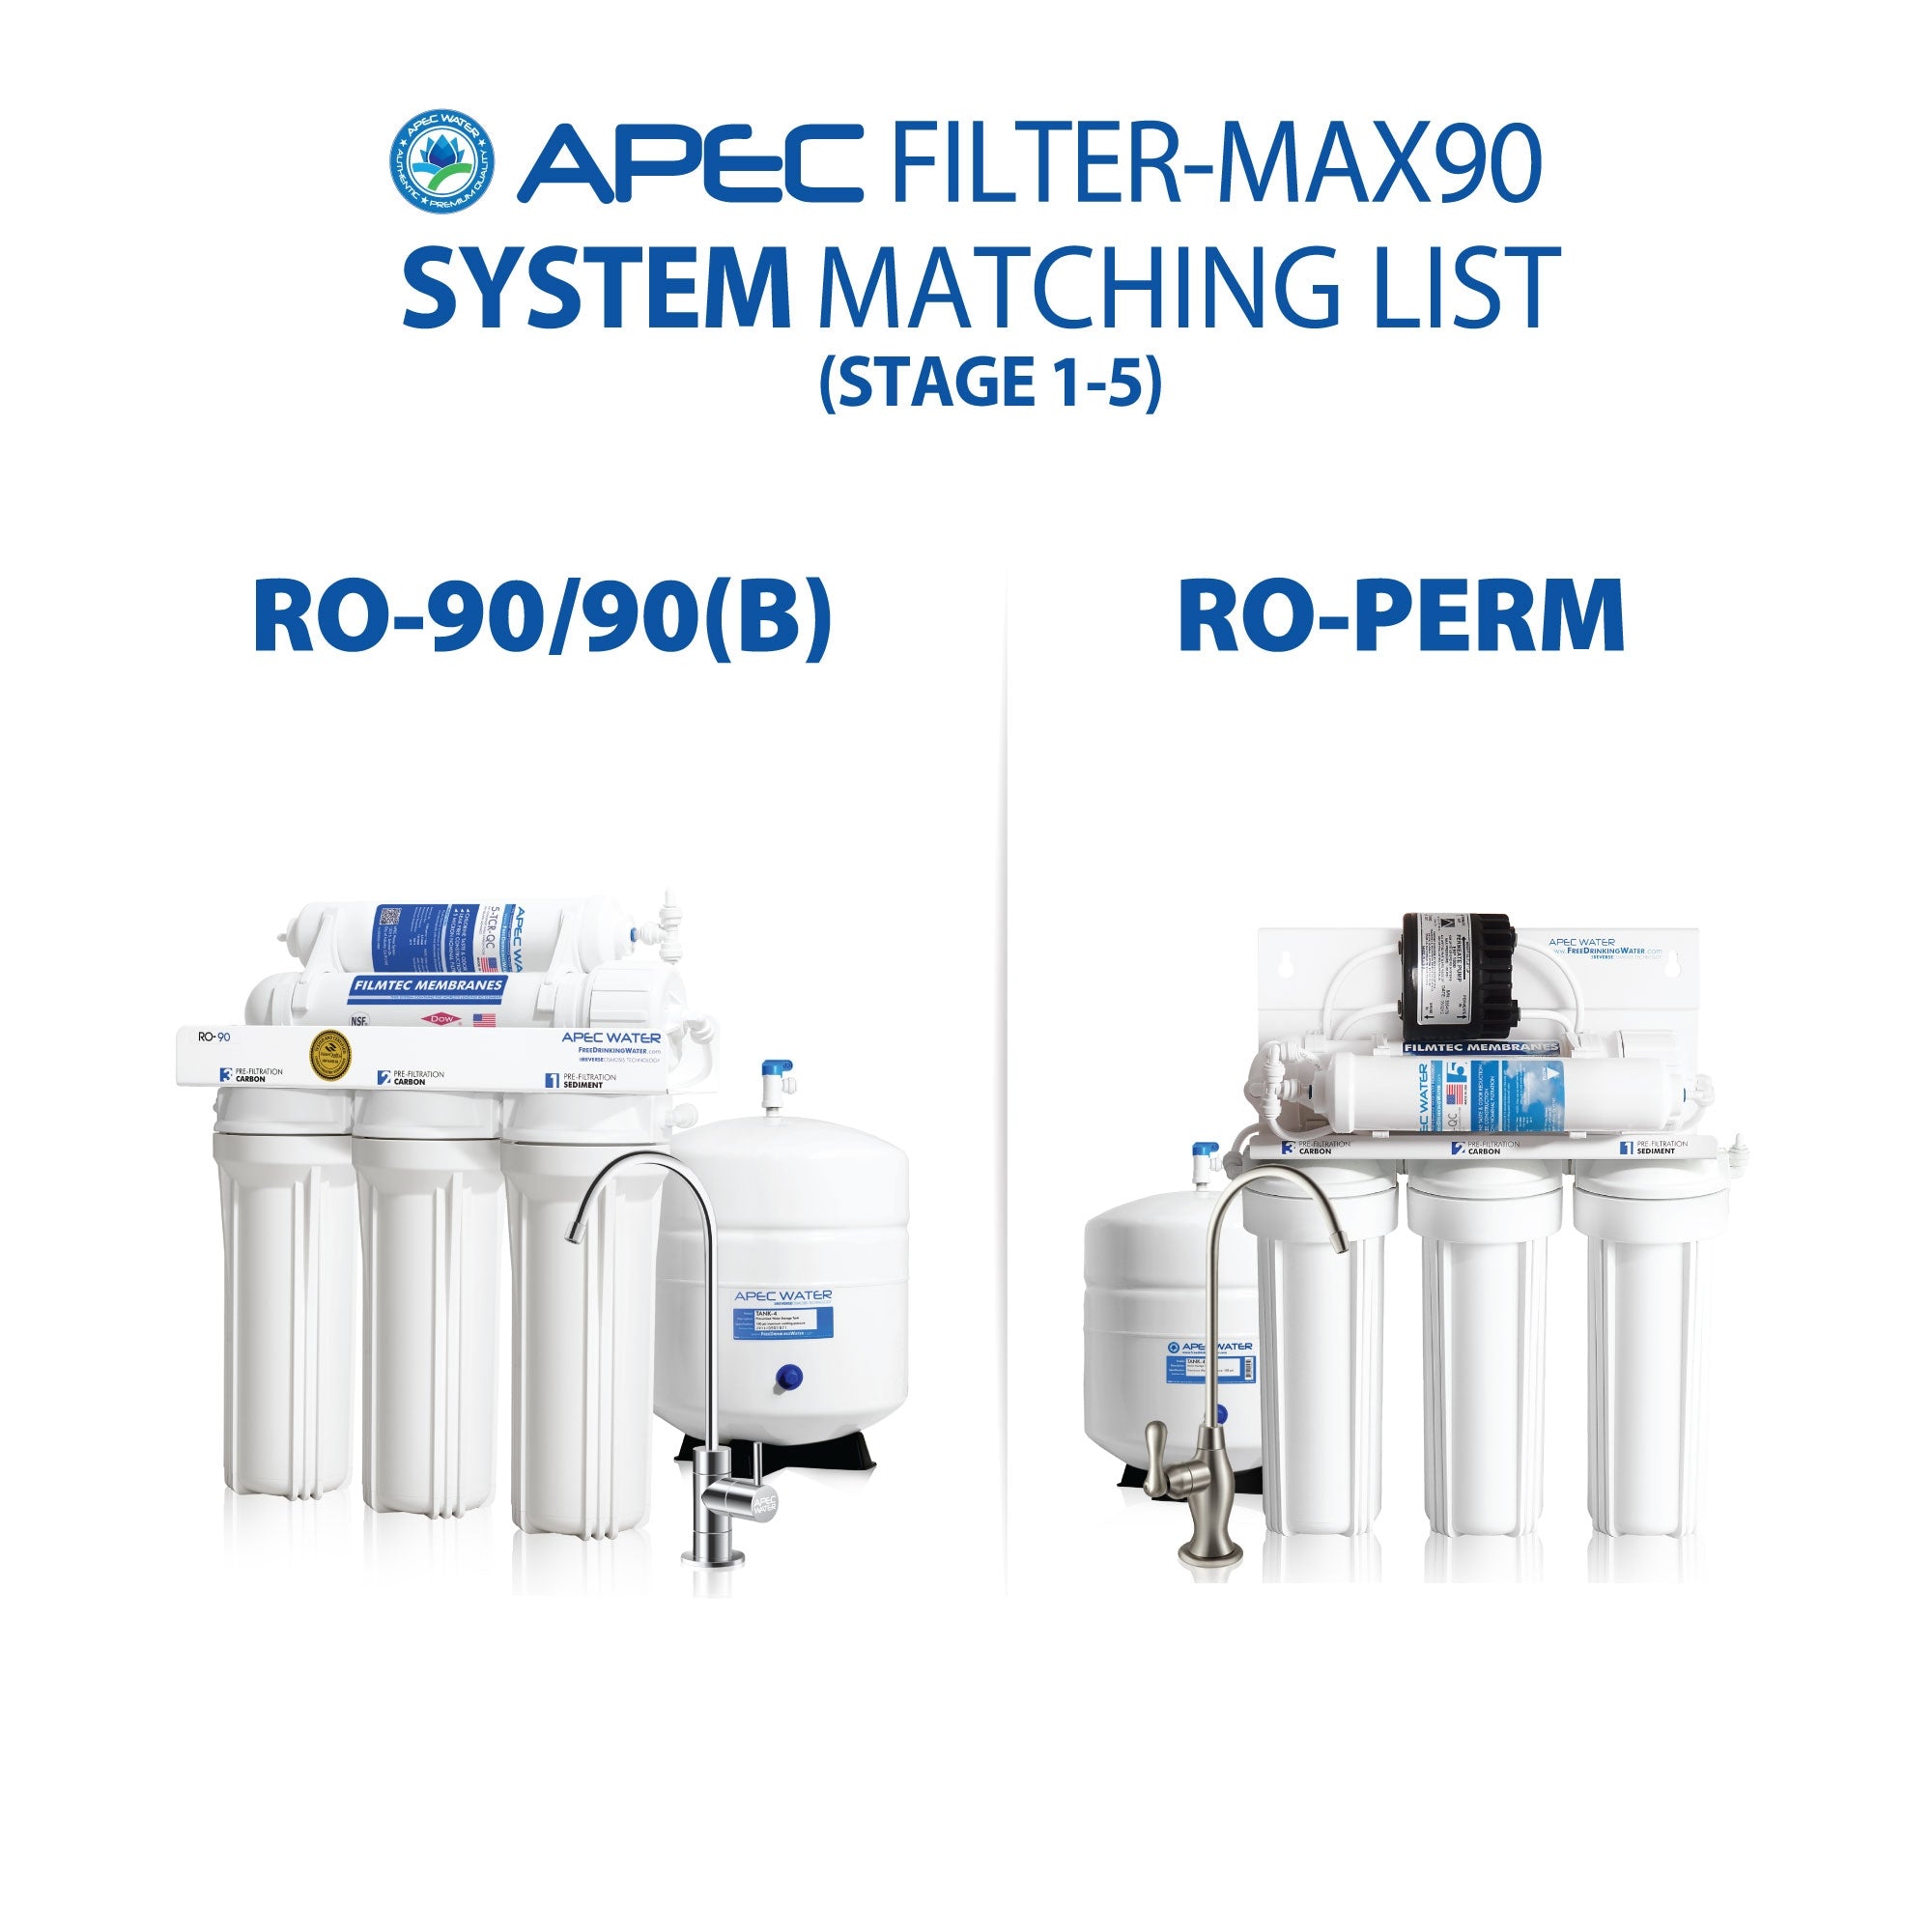 APEC RO Replacement Filters Complete Filter Set for ULTIMATE RO-90 and RO-PERM Models With 1/4"D Tubing (Stages 1-5)